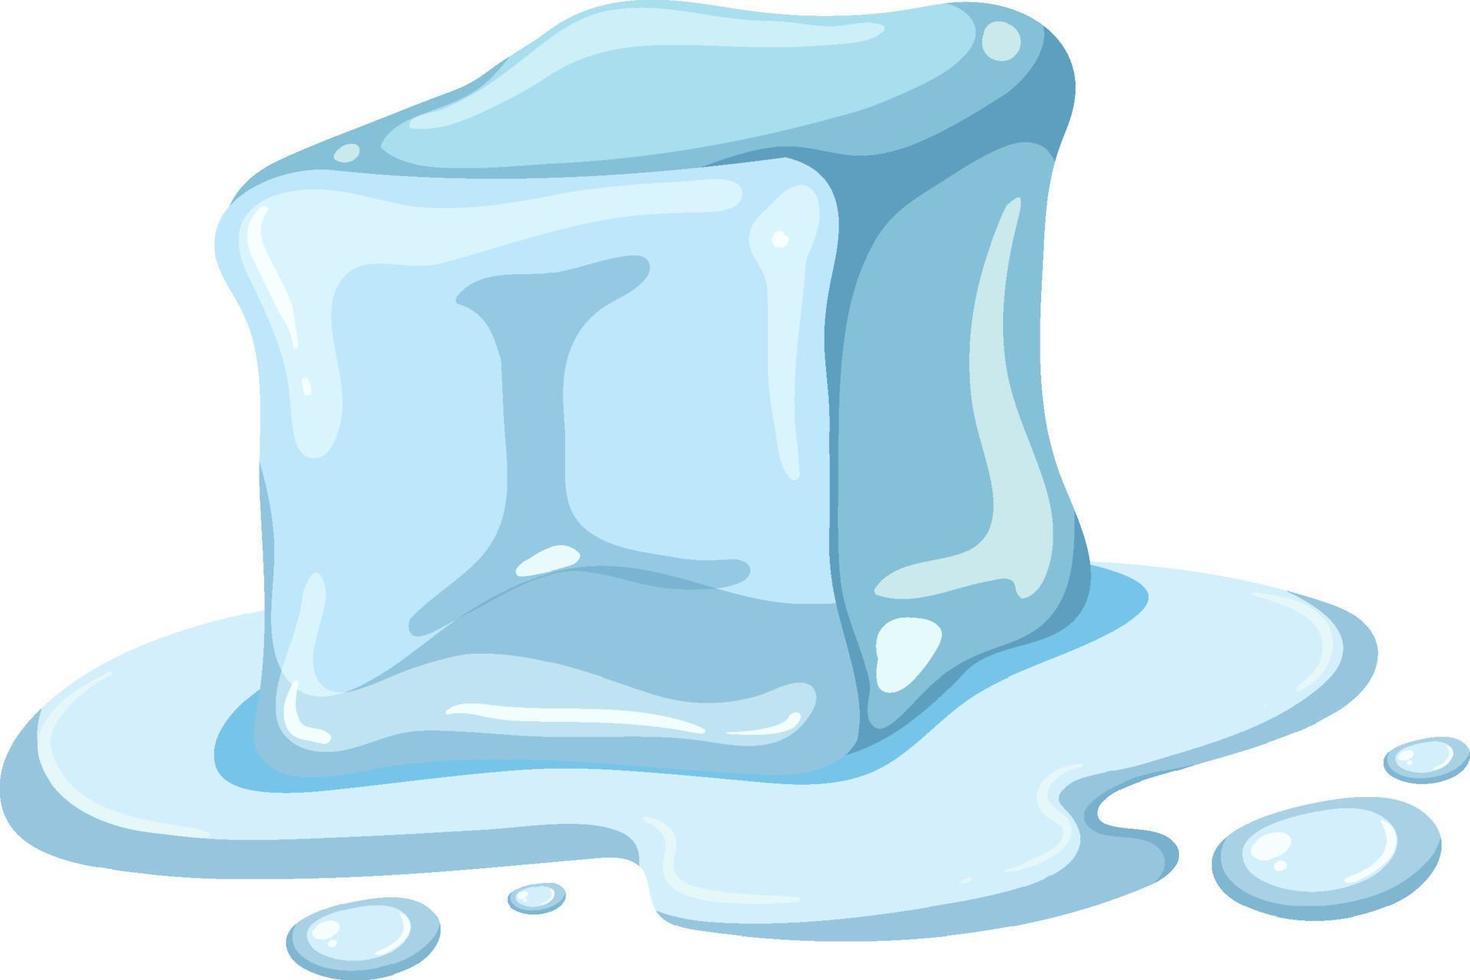 A melting ice cube on white background vector